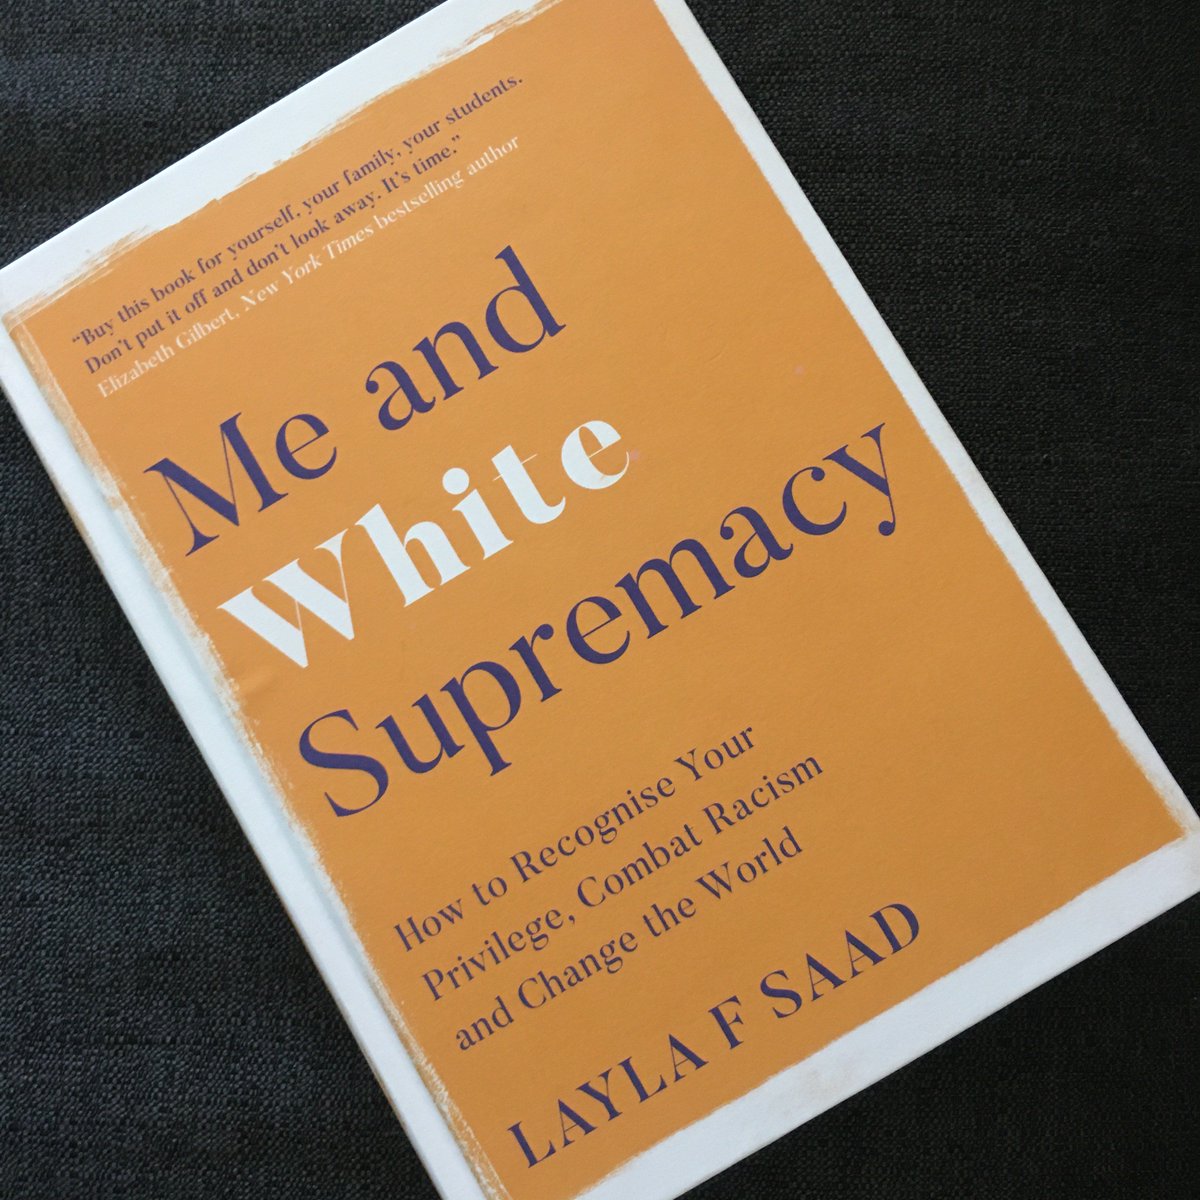 Our Western societies are built on white supremacy, it's embedded in everything, and white people must work to dismantle it. Bare minimum actions for white people include reading books by black authors, and in particular, reading Me and White Supremacy by Layla F Saad 2/5